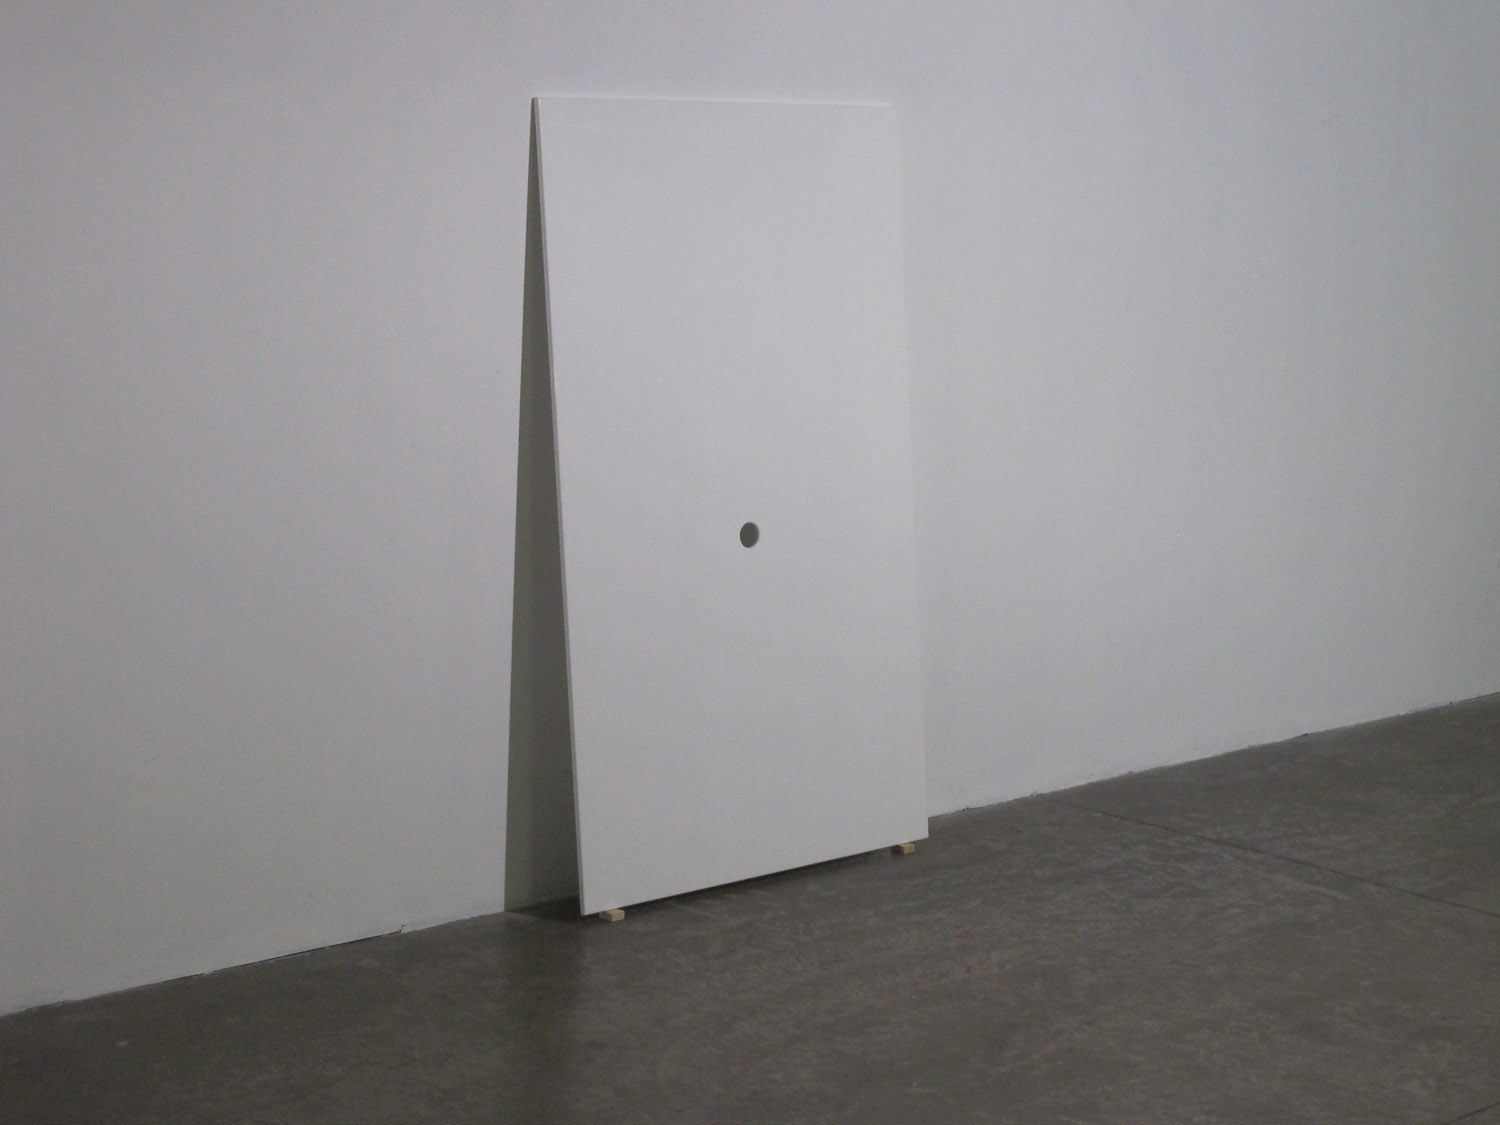 Glory Hole, 2012. MDF painted in white, hole. Installation view, Prometeogallery di Ida Pisani.